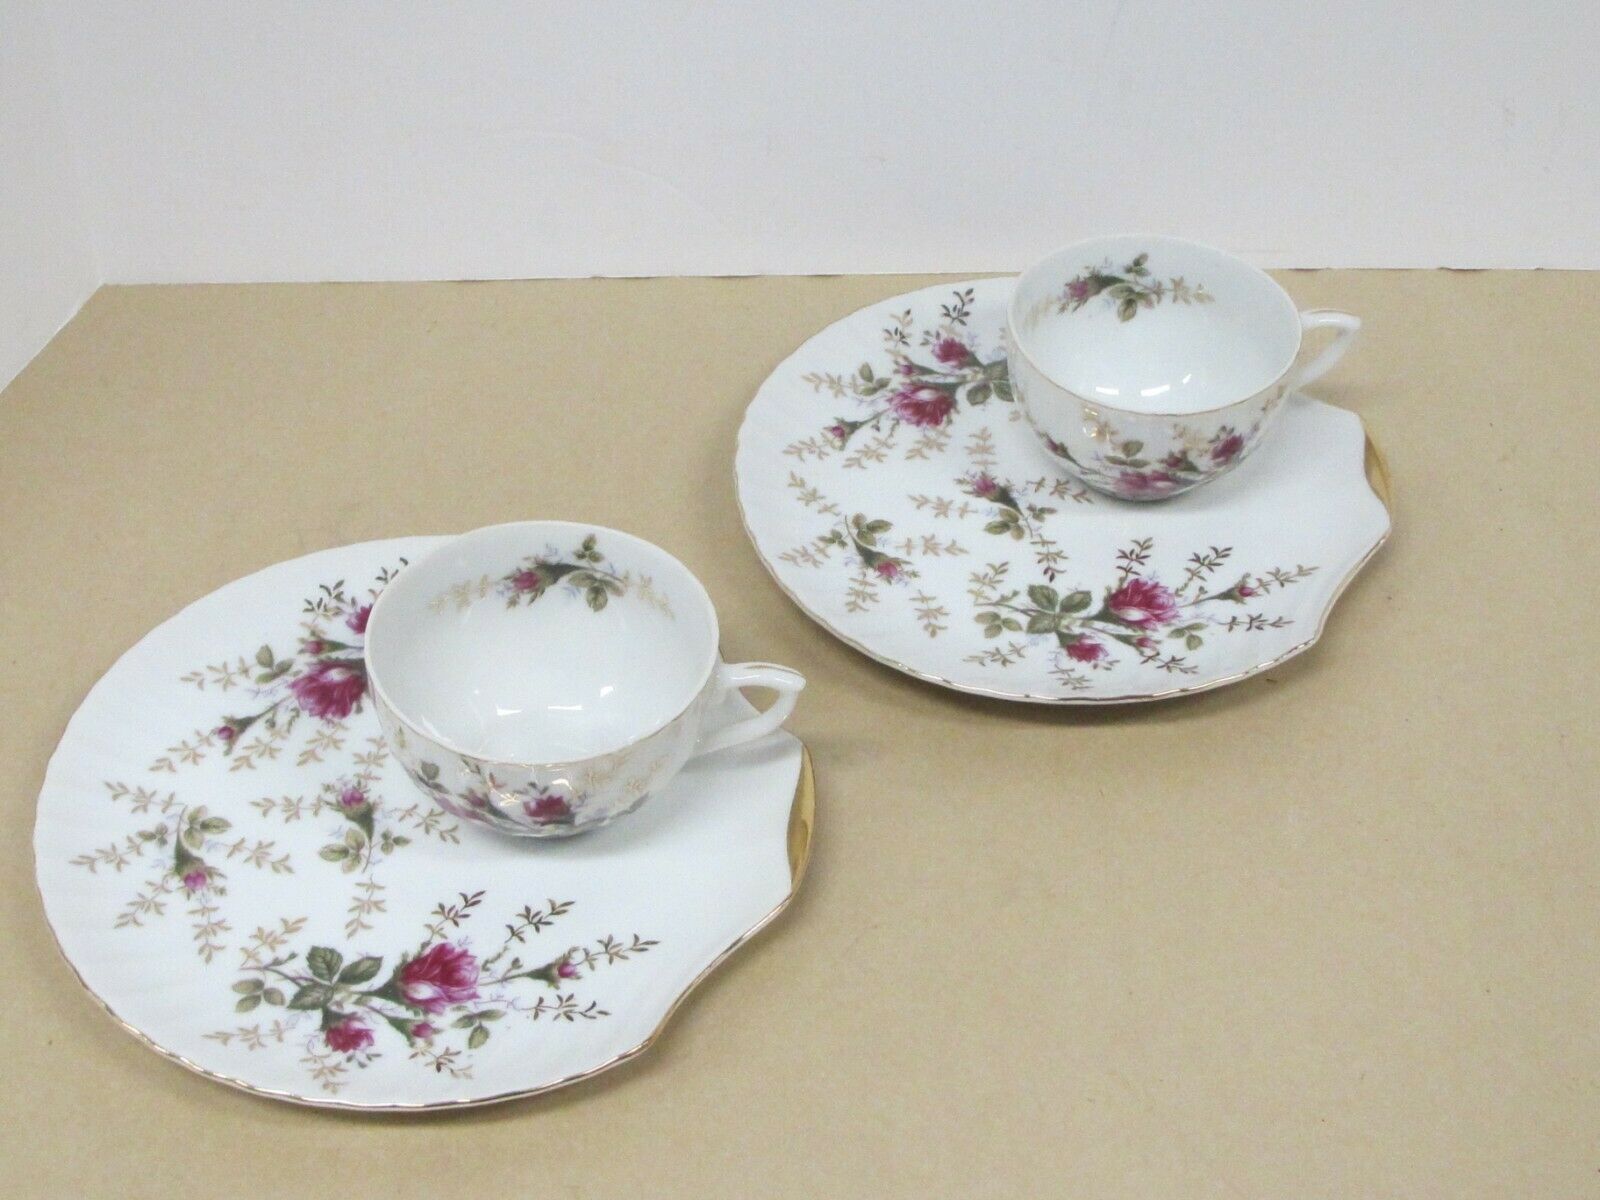 Coffee and Tea Rose Pattern China Tea Cups & Biscuit Saucers